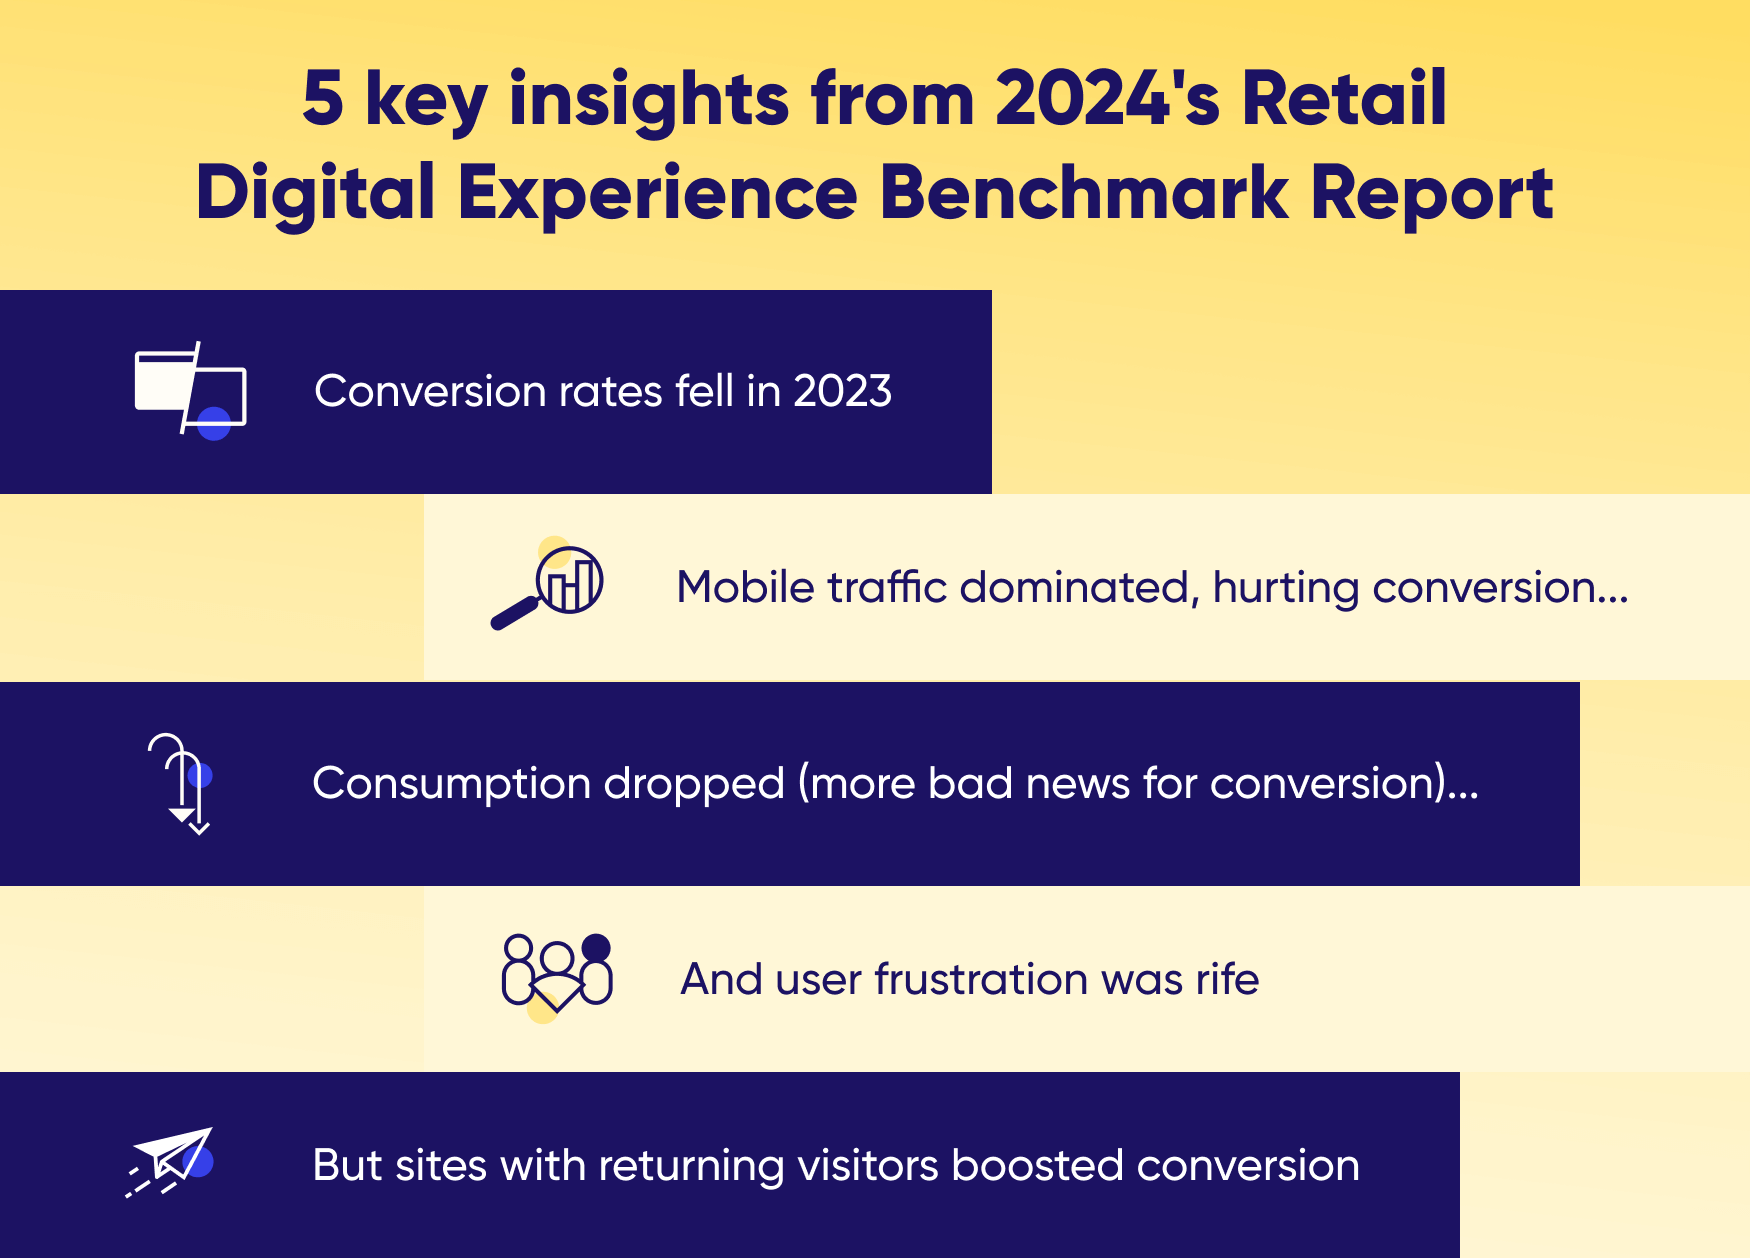 5 key insights from the 2024 Retail Digital Experience Benchmark Report to help boost retail conversion rates